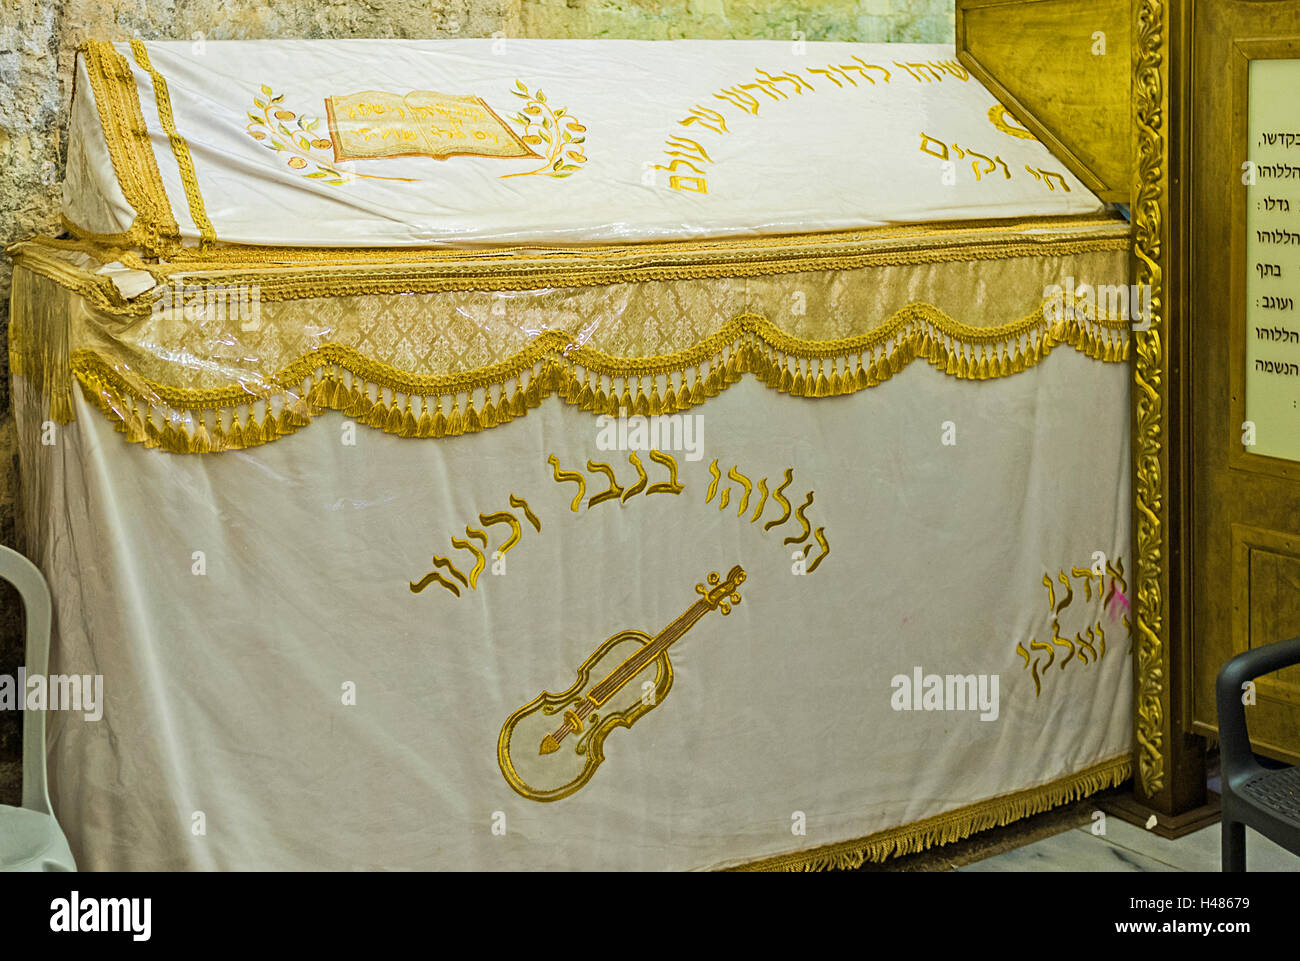 The Sarcofagus of King David covered with embroidered cloth, this is the place of worships of the Hasidic Jews, Jerusalem Stock Photo